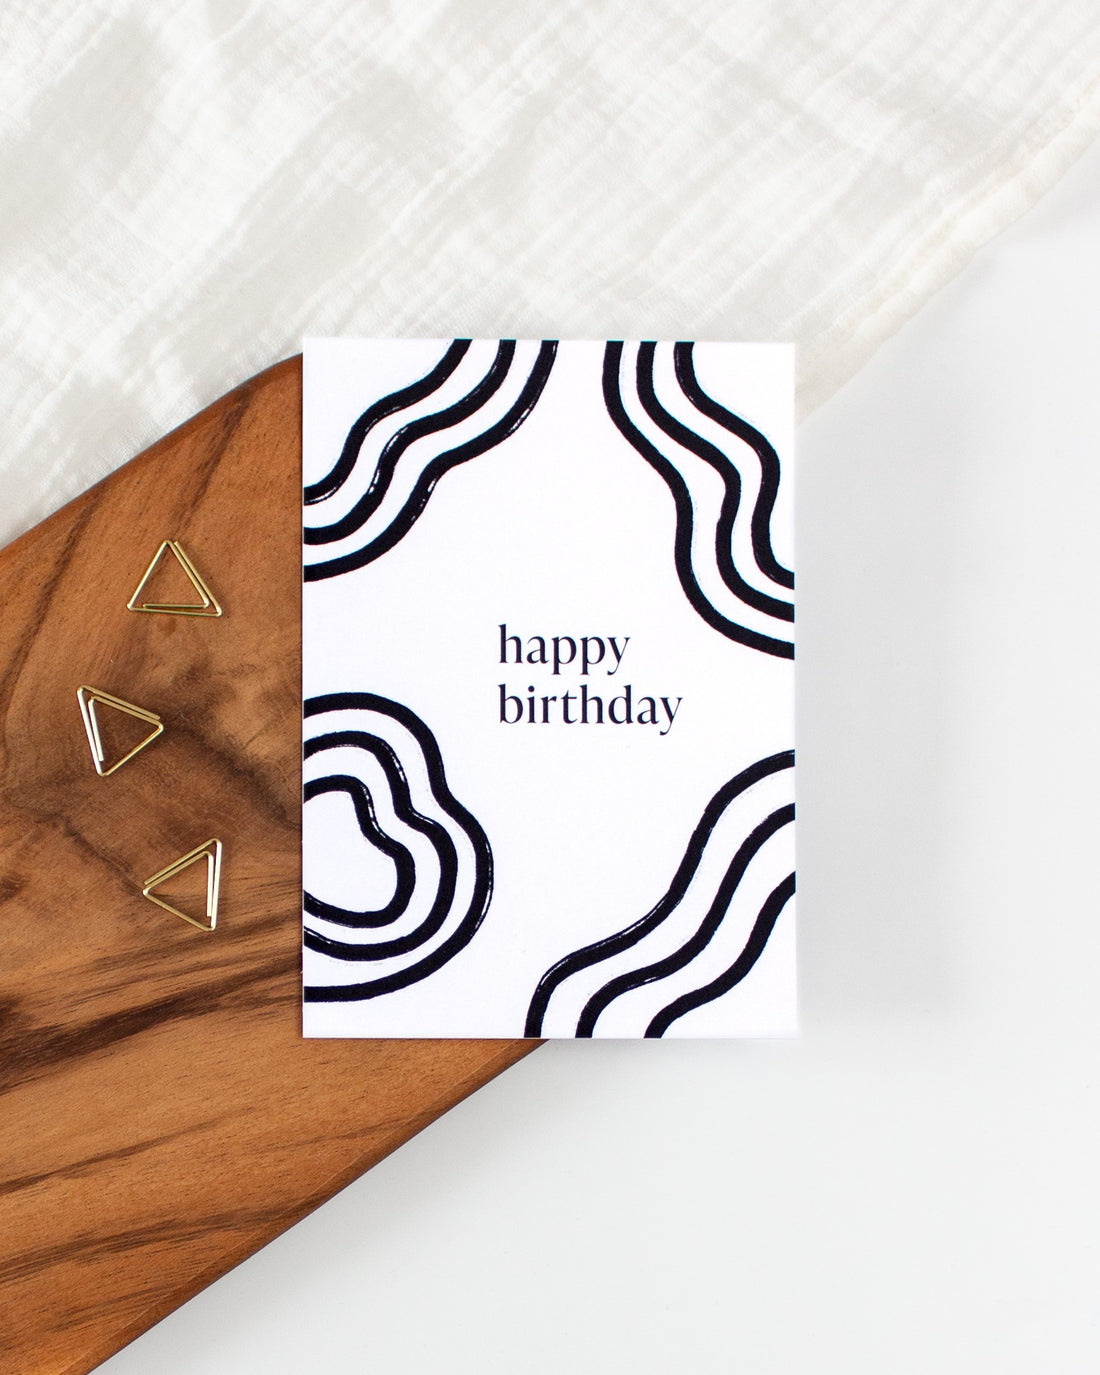 A postcard laying on a wooden board with some golden triangle paperclips and a white cloth in the background. The postcard design consists of bold black wavy lines and text saying &quot;happy birthday&quot;.